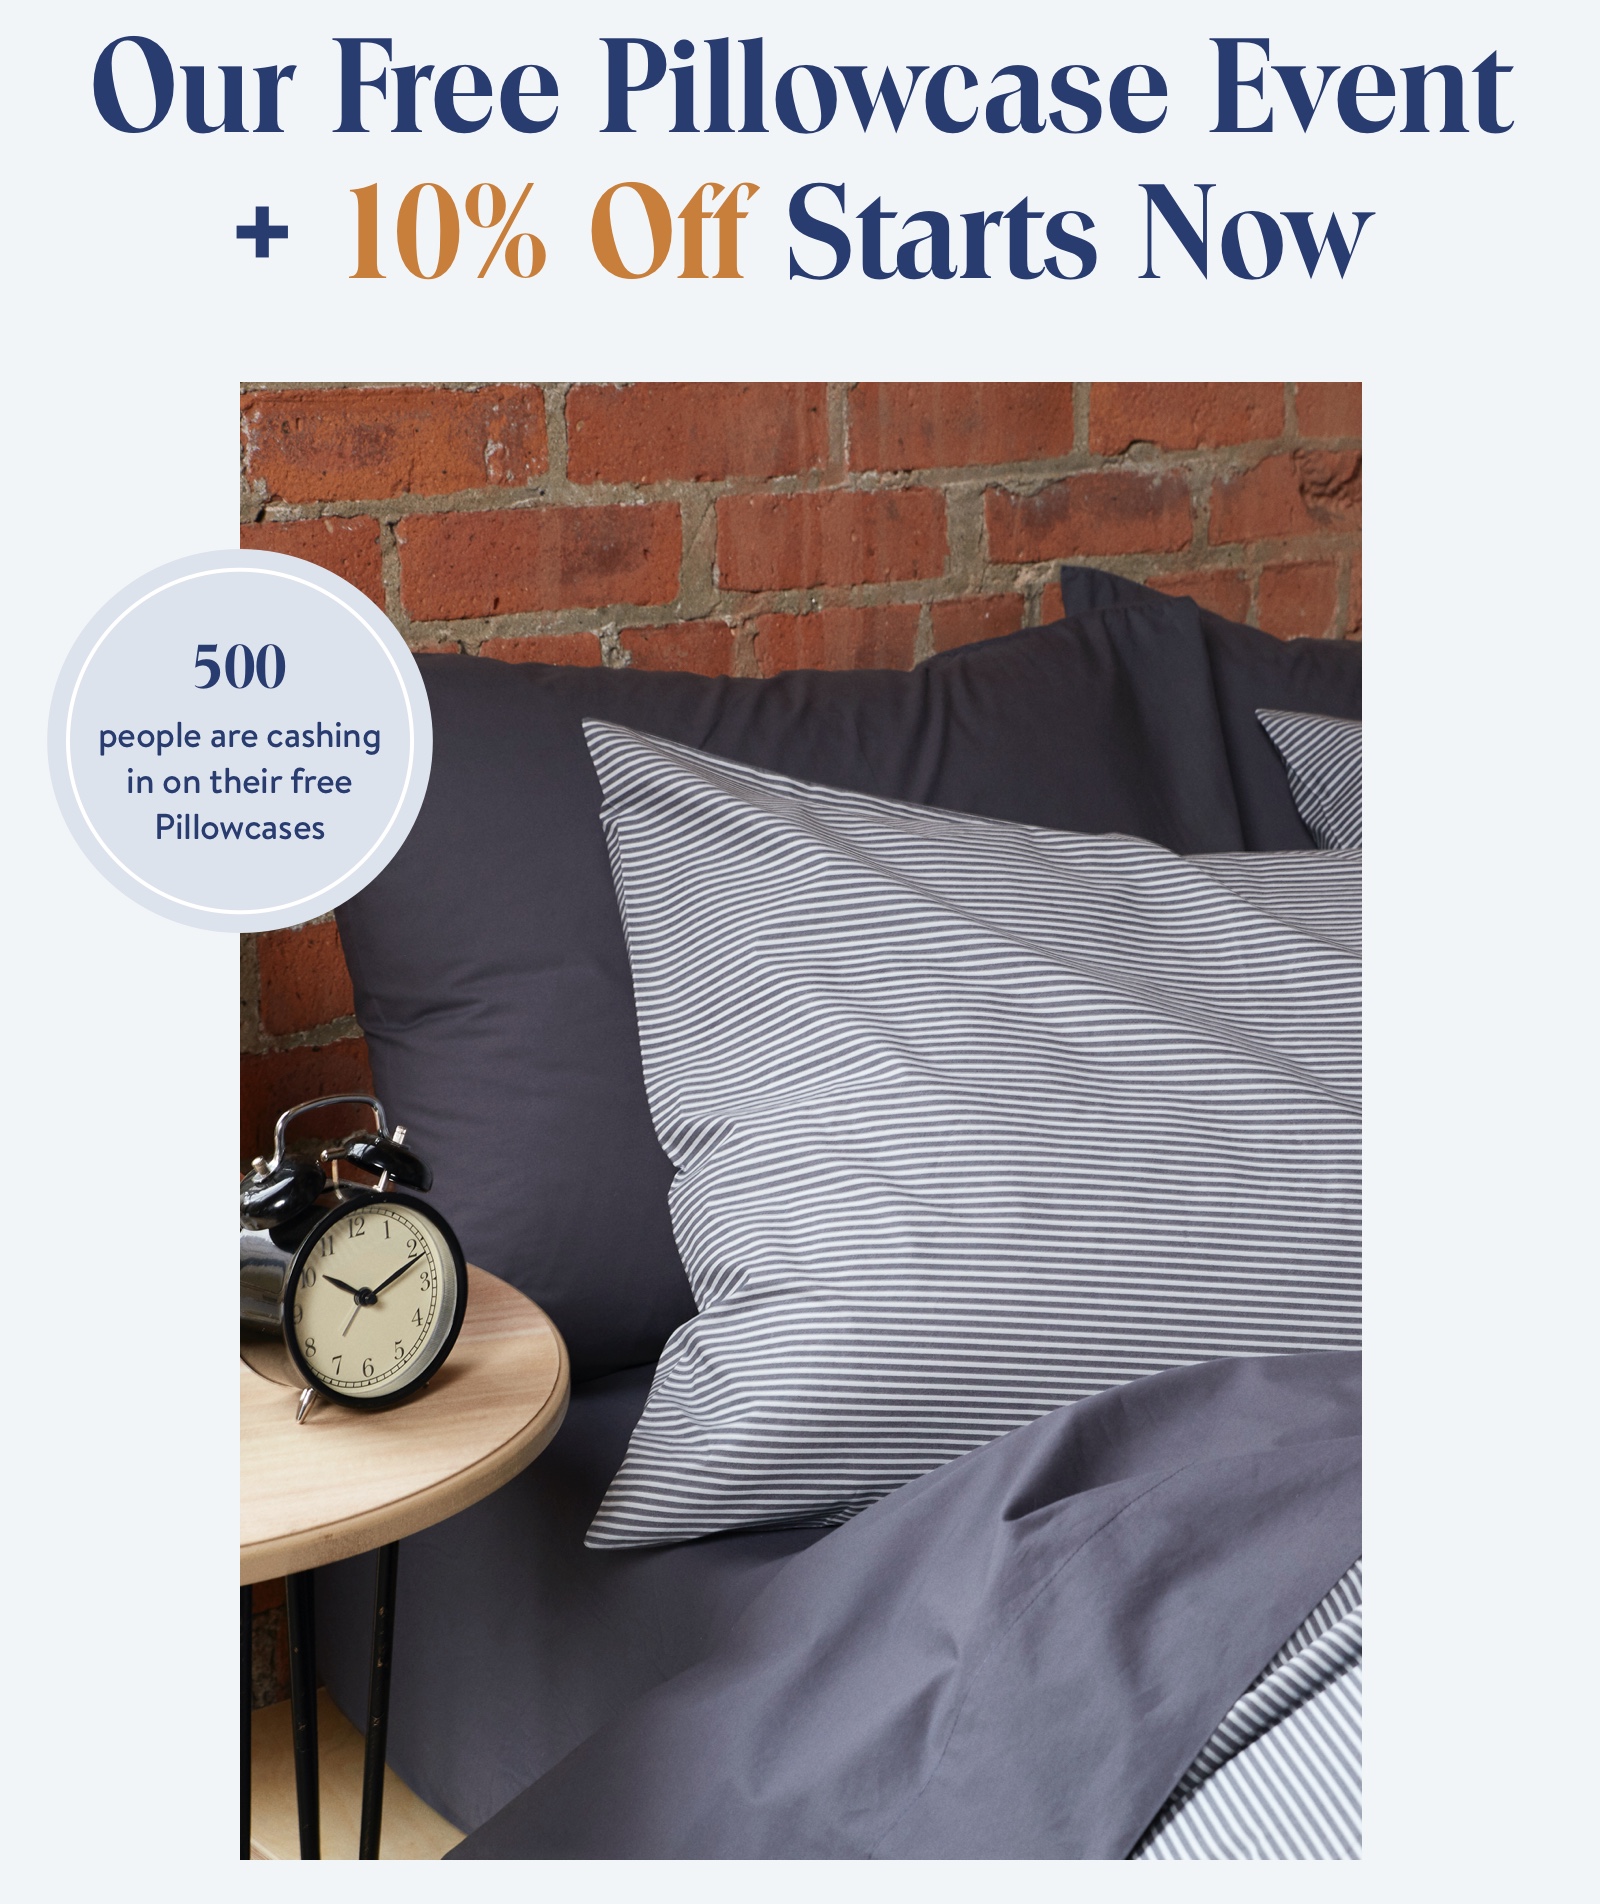 Our Free Pillowcase Event + 10% Off Starts Now